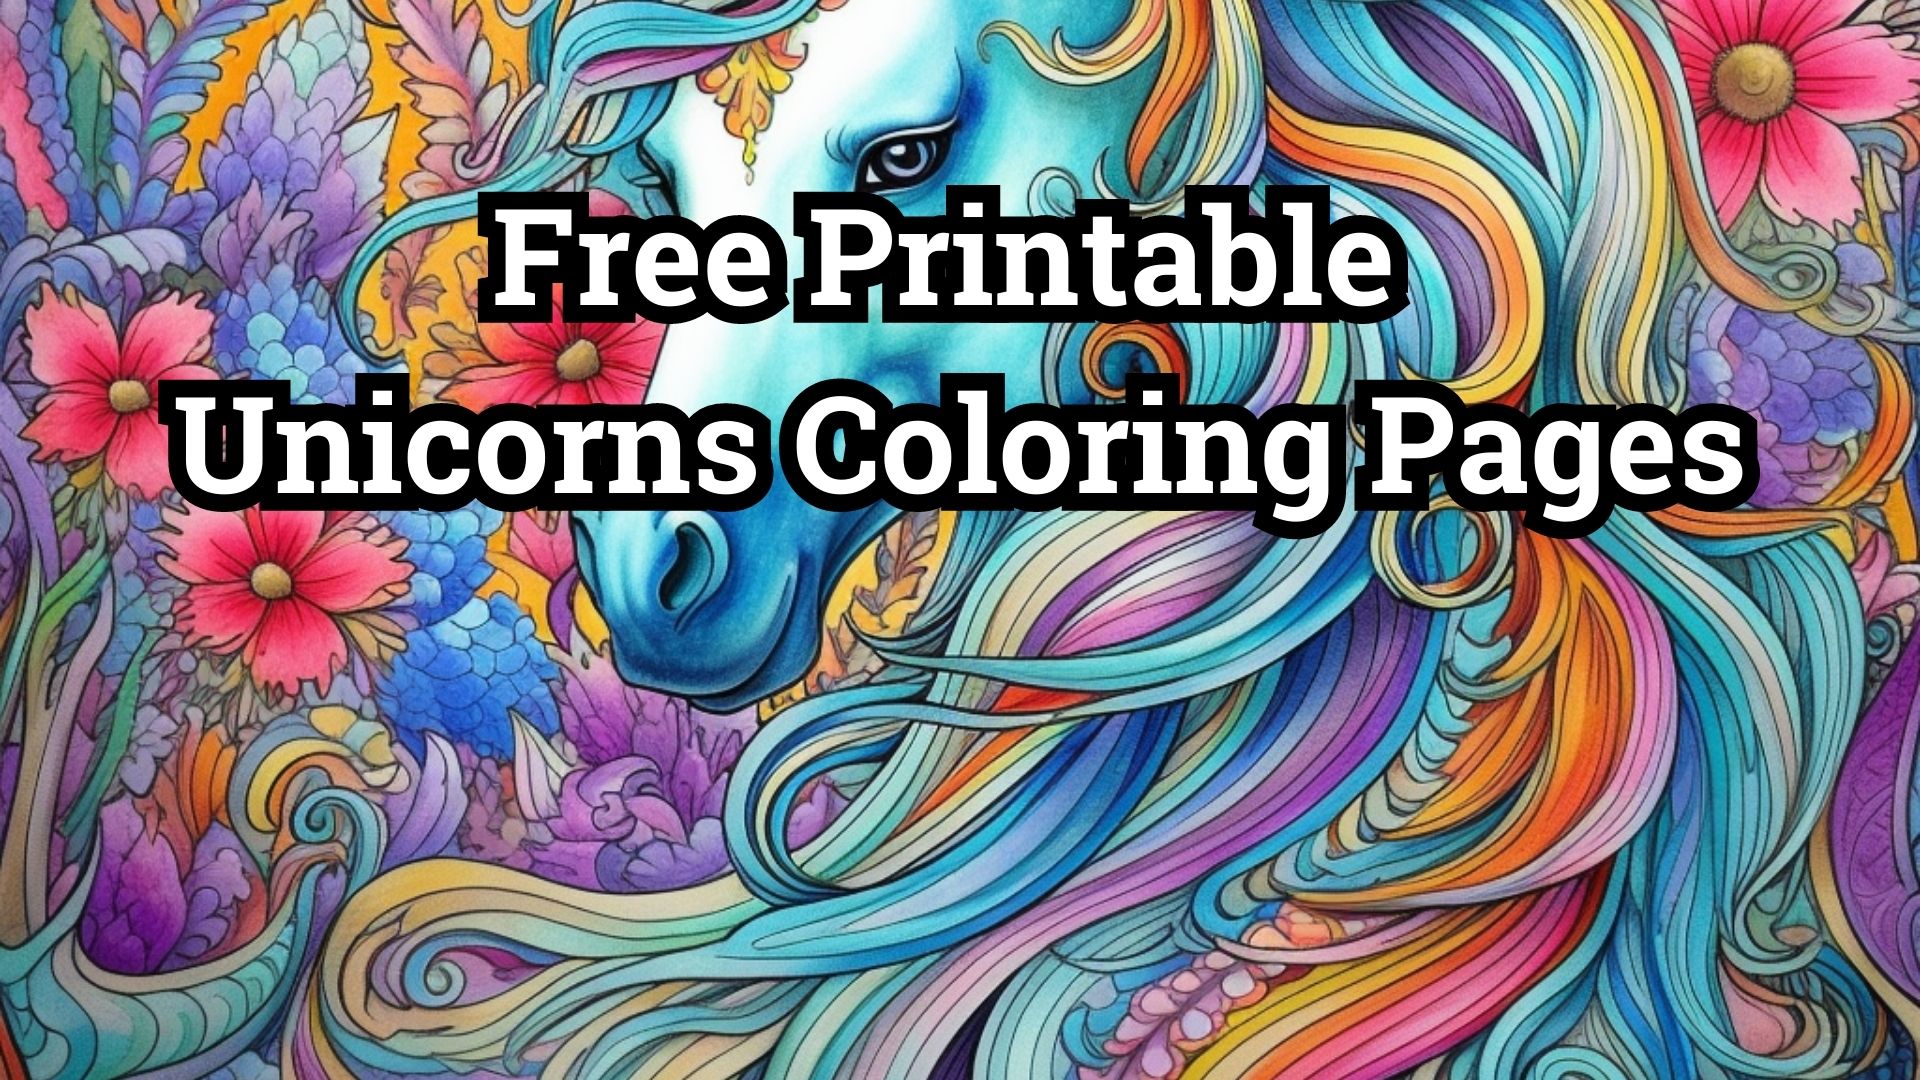 Free Printable Unicorns Coloring Pages List